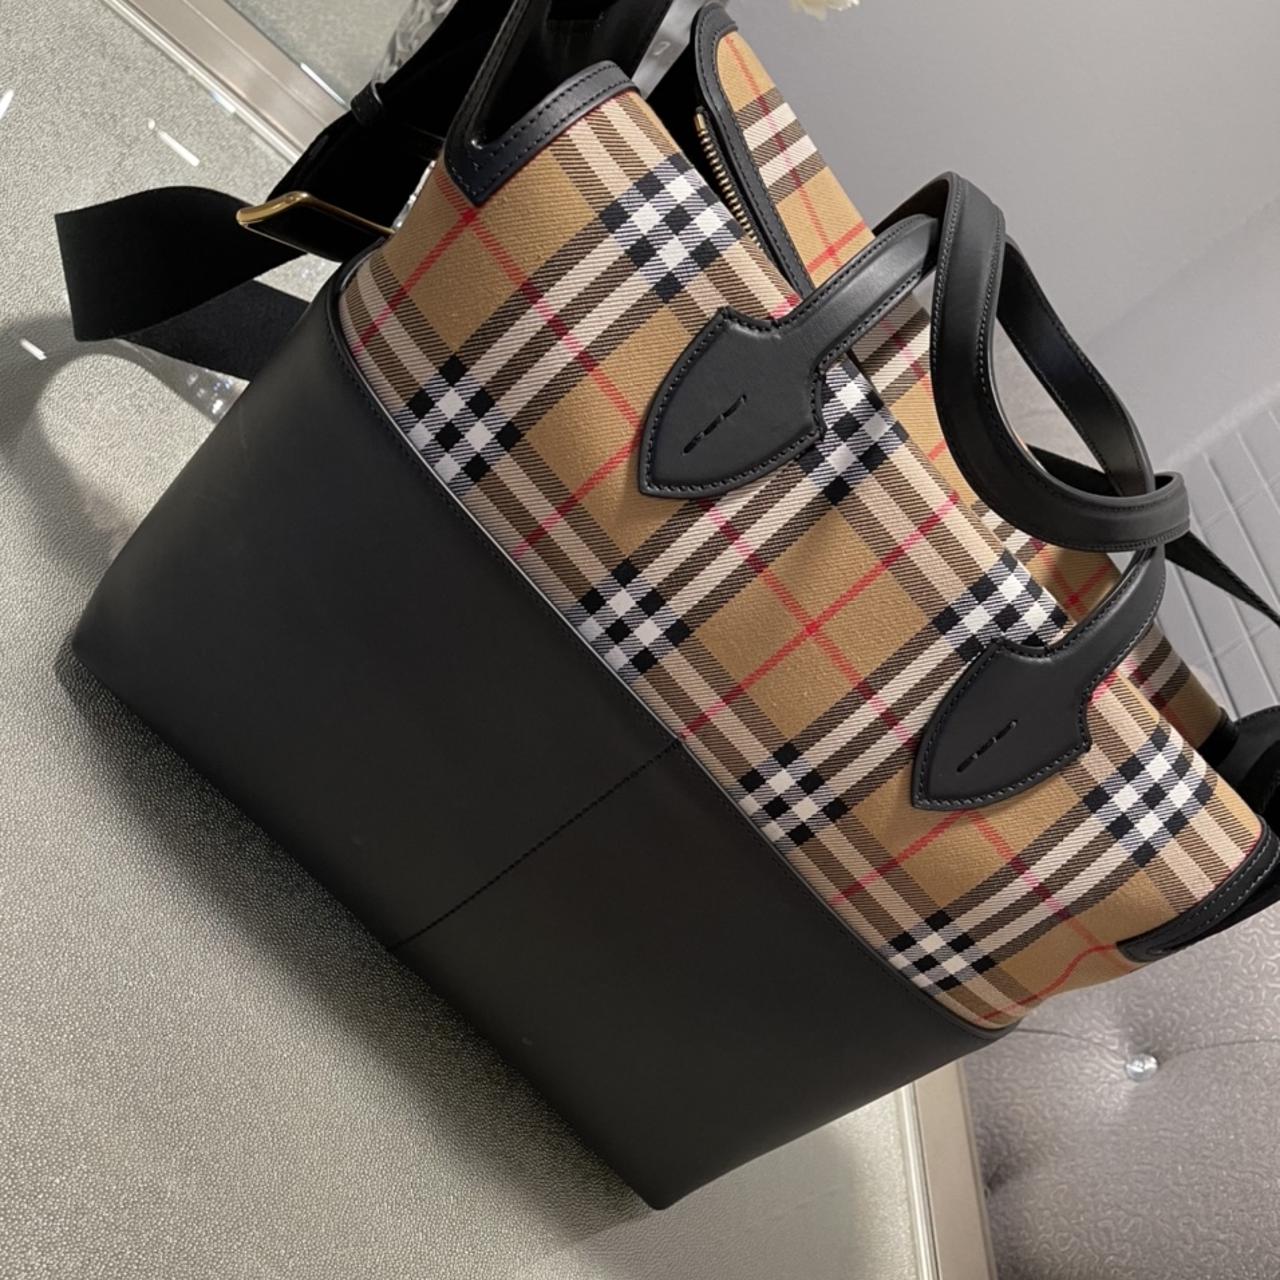 authentic burberry bag Used